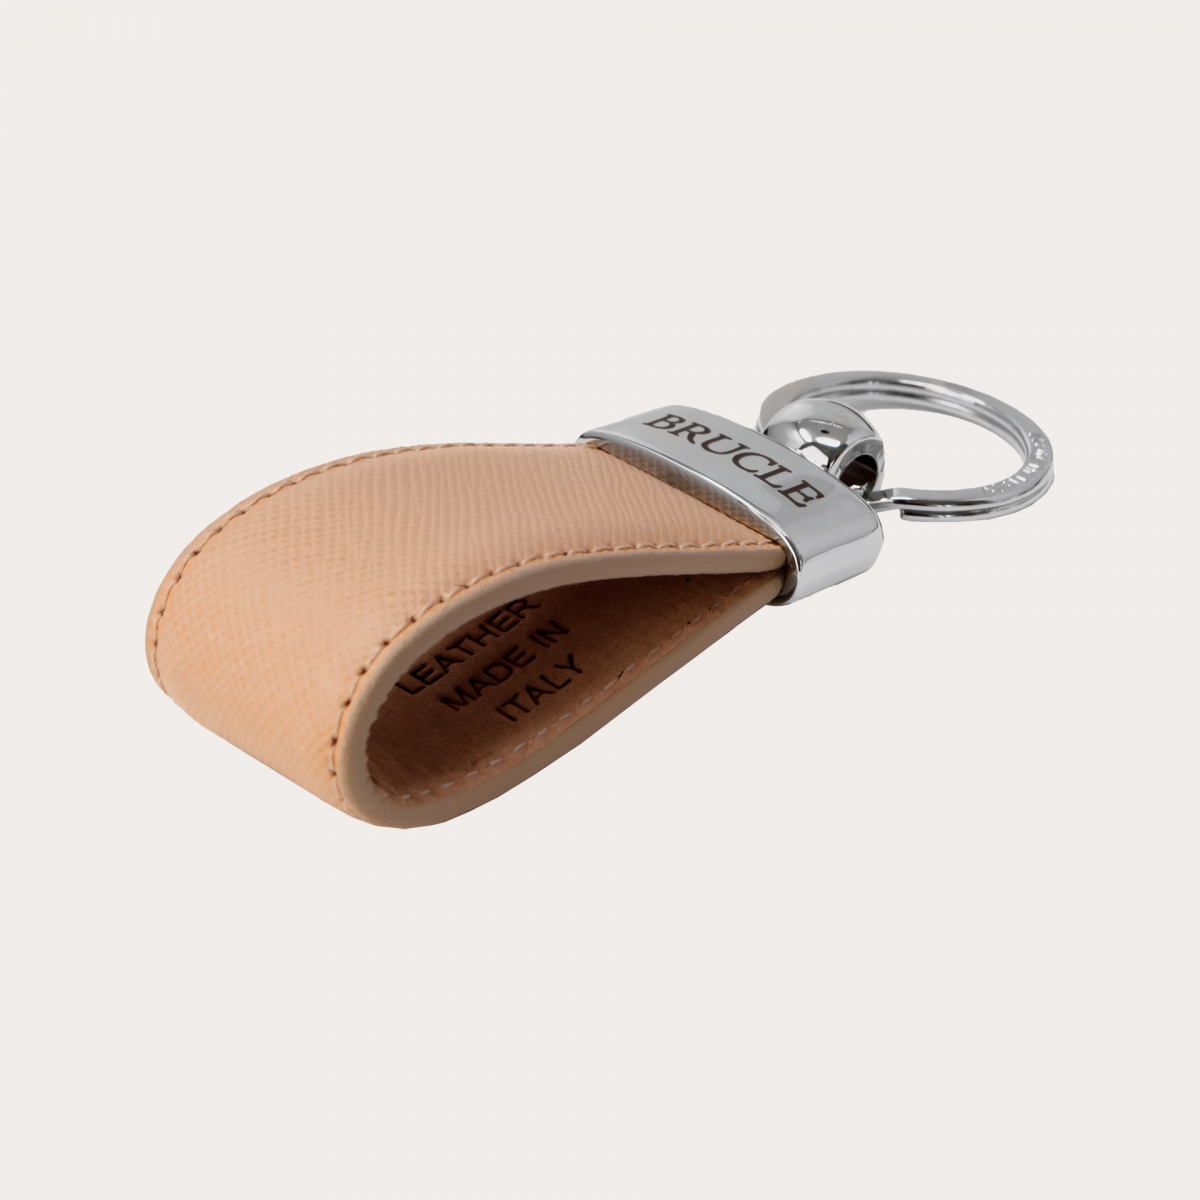 BRUCLE Keychain in genuine leather with saffiano print, taupé